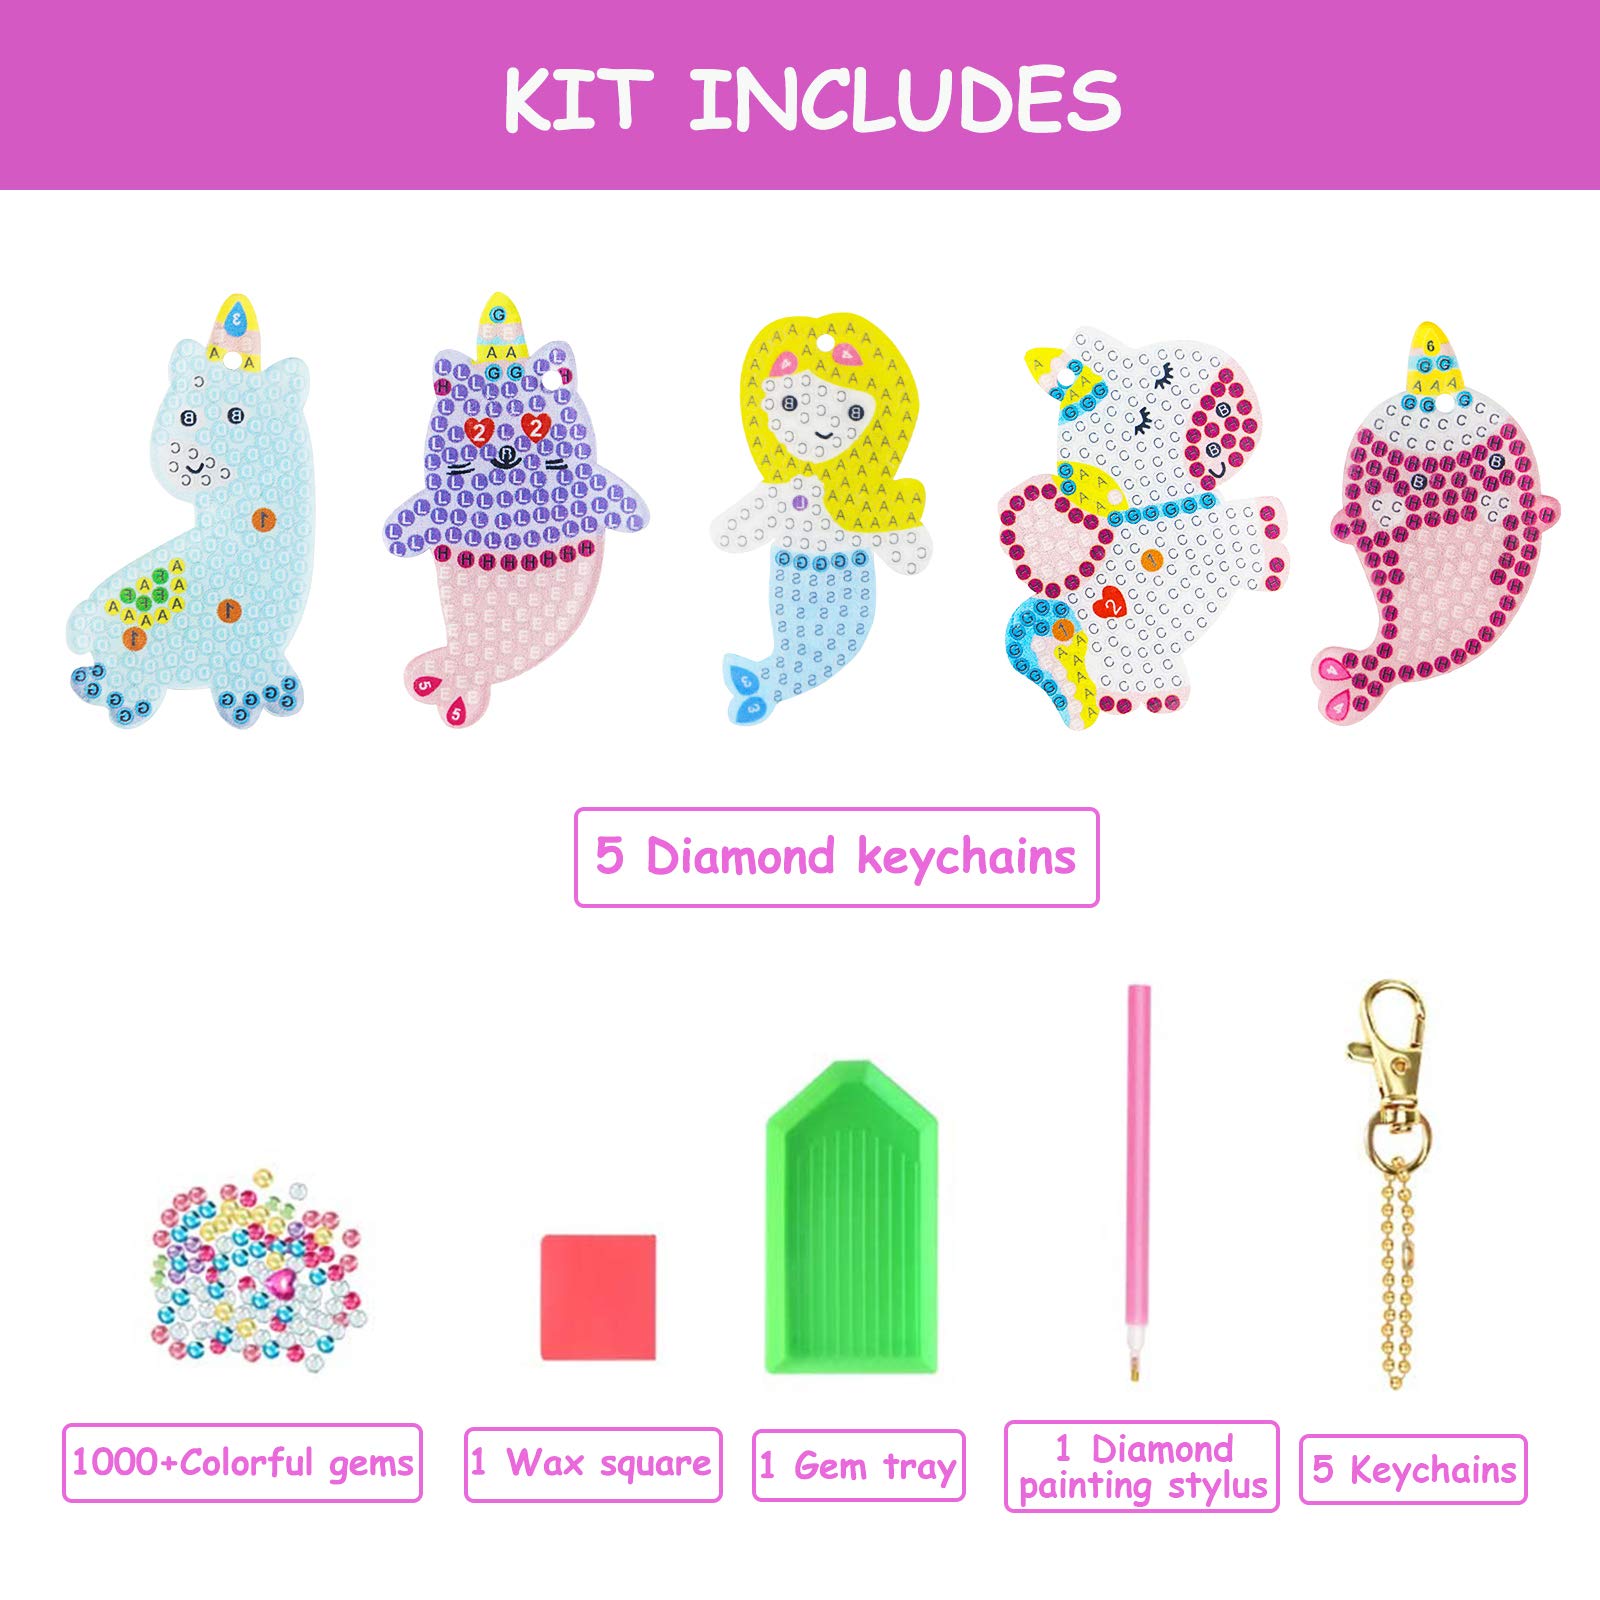 Arts and Crafts for Kids Ages 8-12 - Diamond Painting Kits for Kids - Make Your Own Gem Art Keychains by Number - DIY Birthday Gifts Thanksgiving Christmas Crafts for Girls Boys Ages 3-5 4-6 6-8 10-12